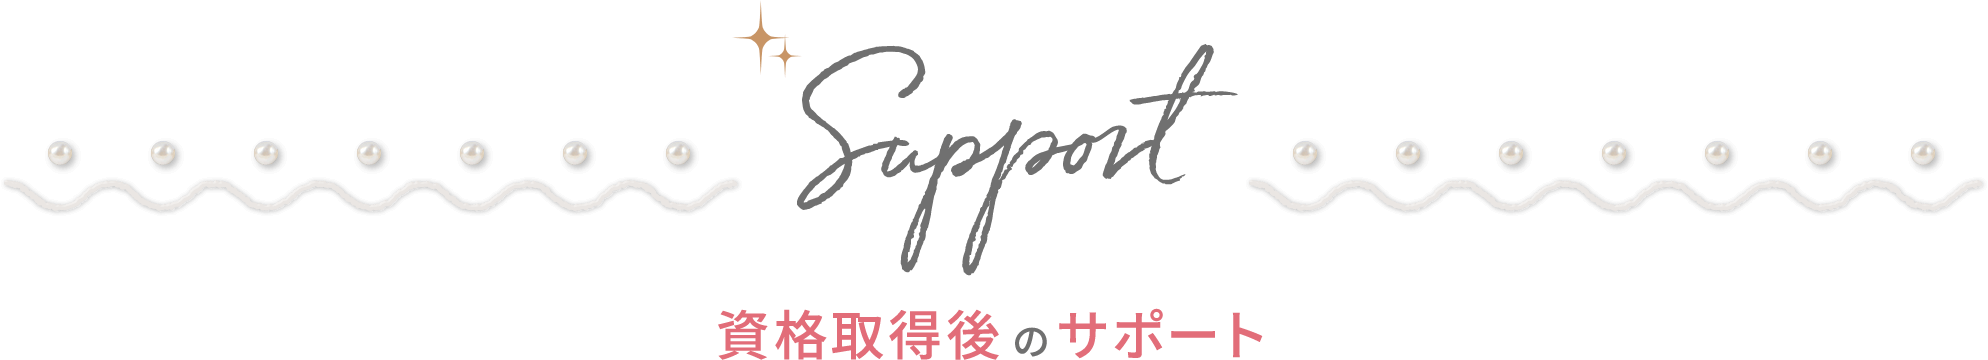 Support 資格取得後のサポート